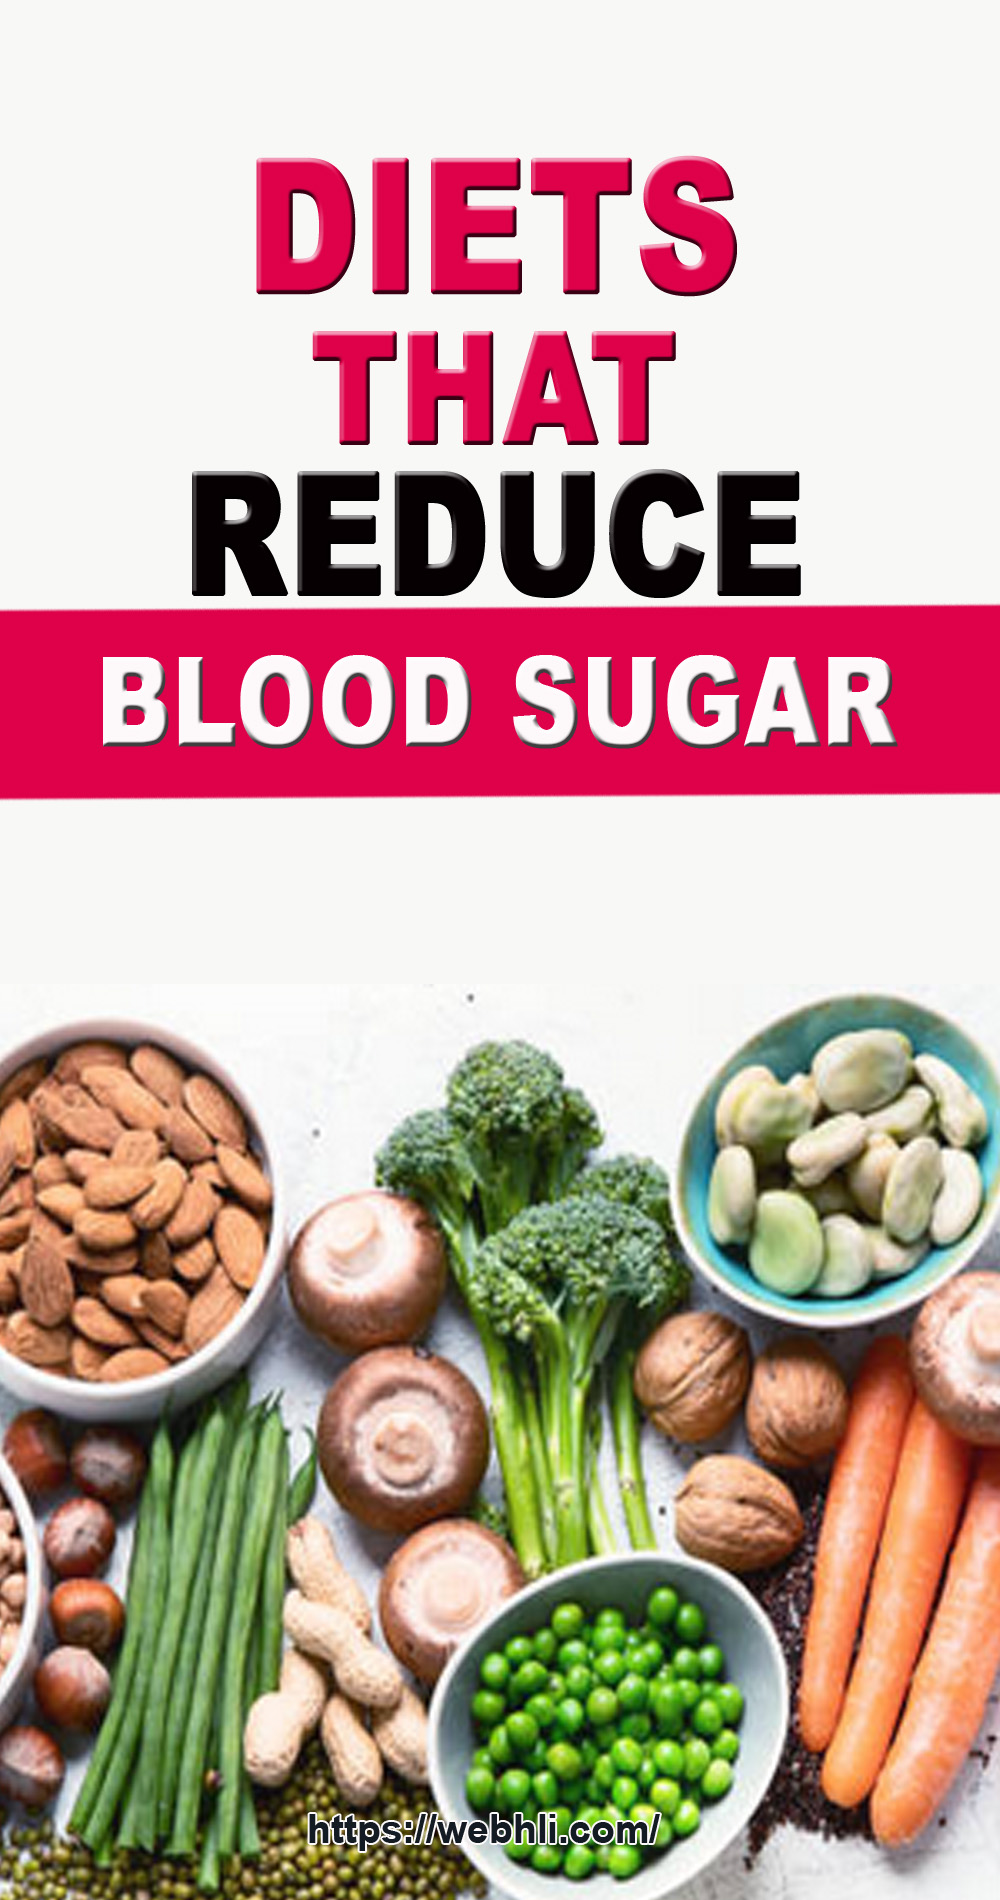 Diets that Reduce Blood Sugar | Healthy Lifestyle